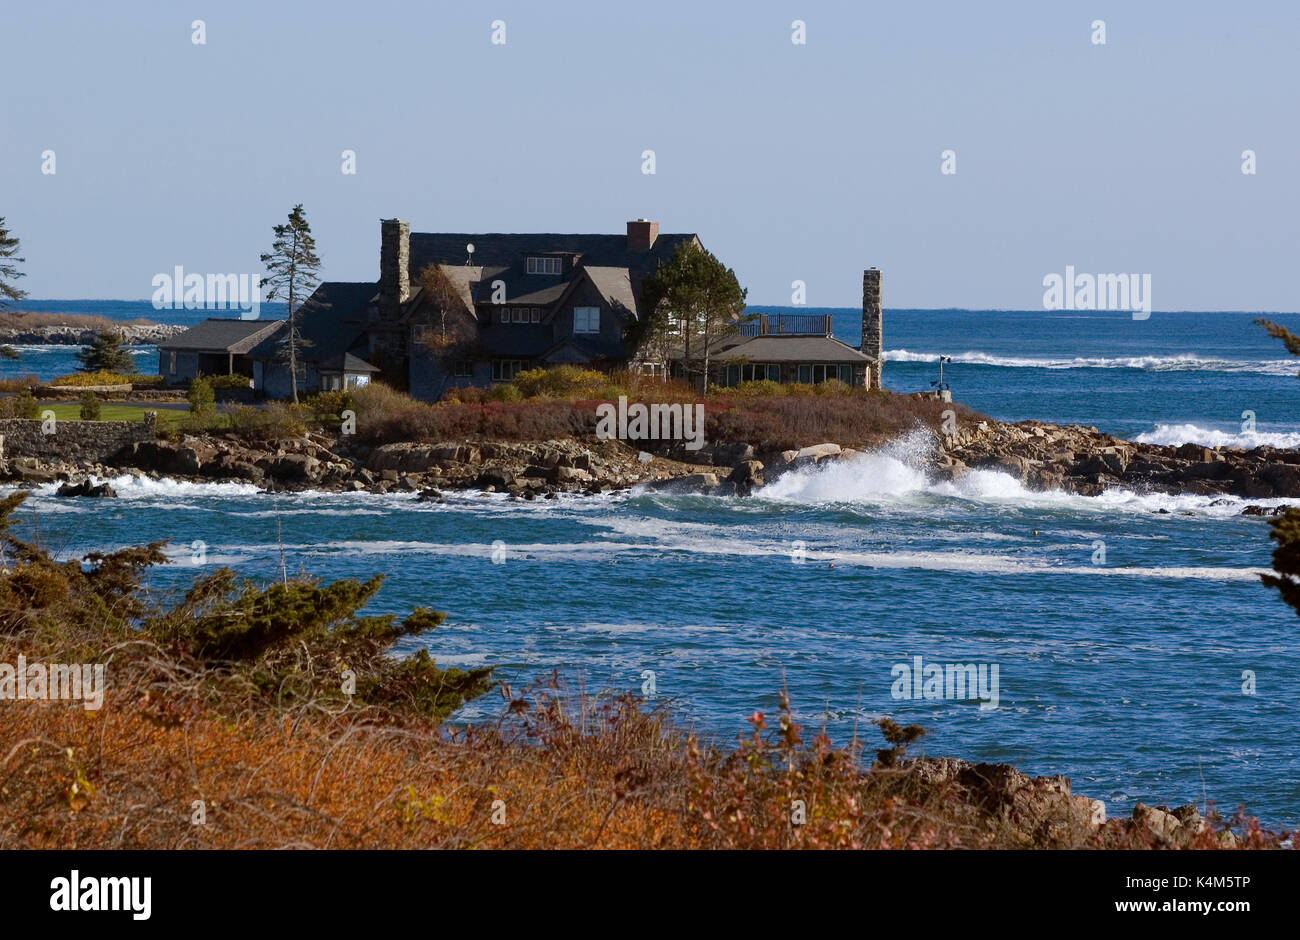 The summer home of former US President George H. W. Bush (Walker's Point) in Kennebunkport, Maine Stock Photo